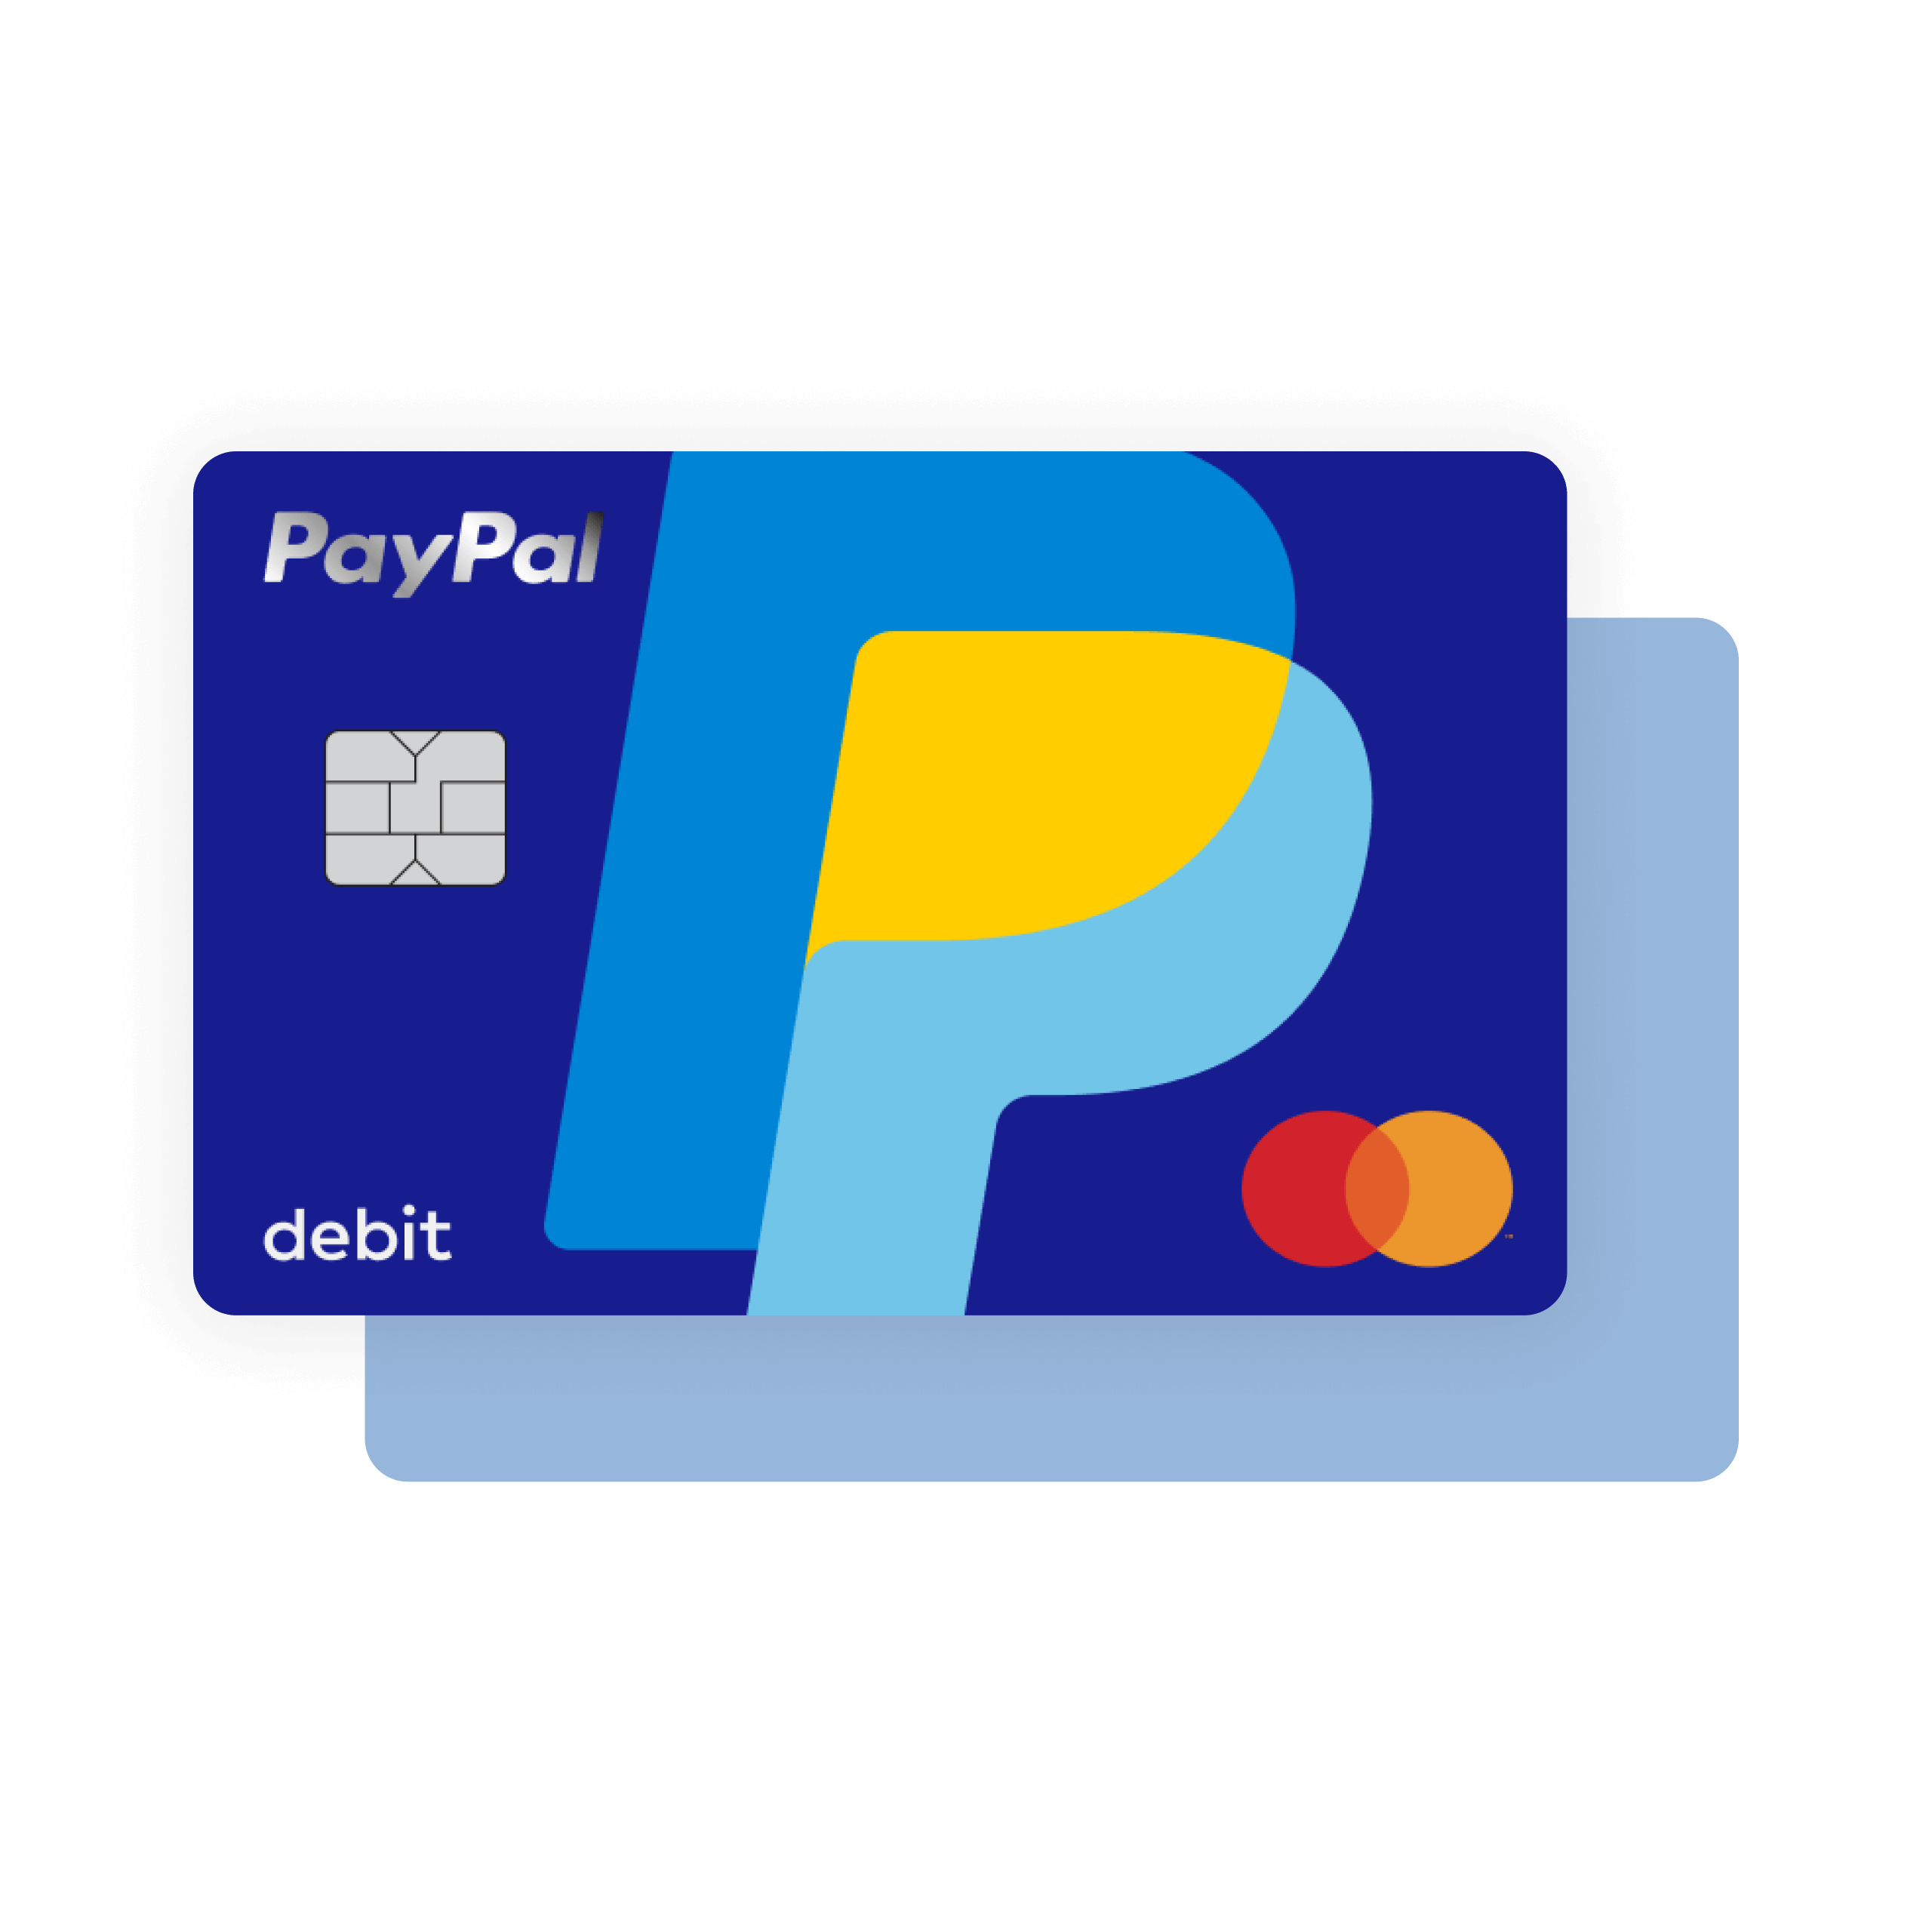 How To Apply For Paypal Credit Card - Artistrestaurant2